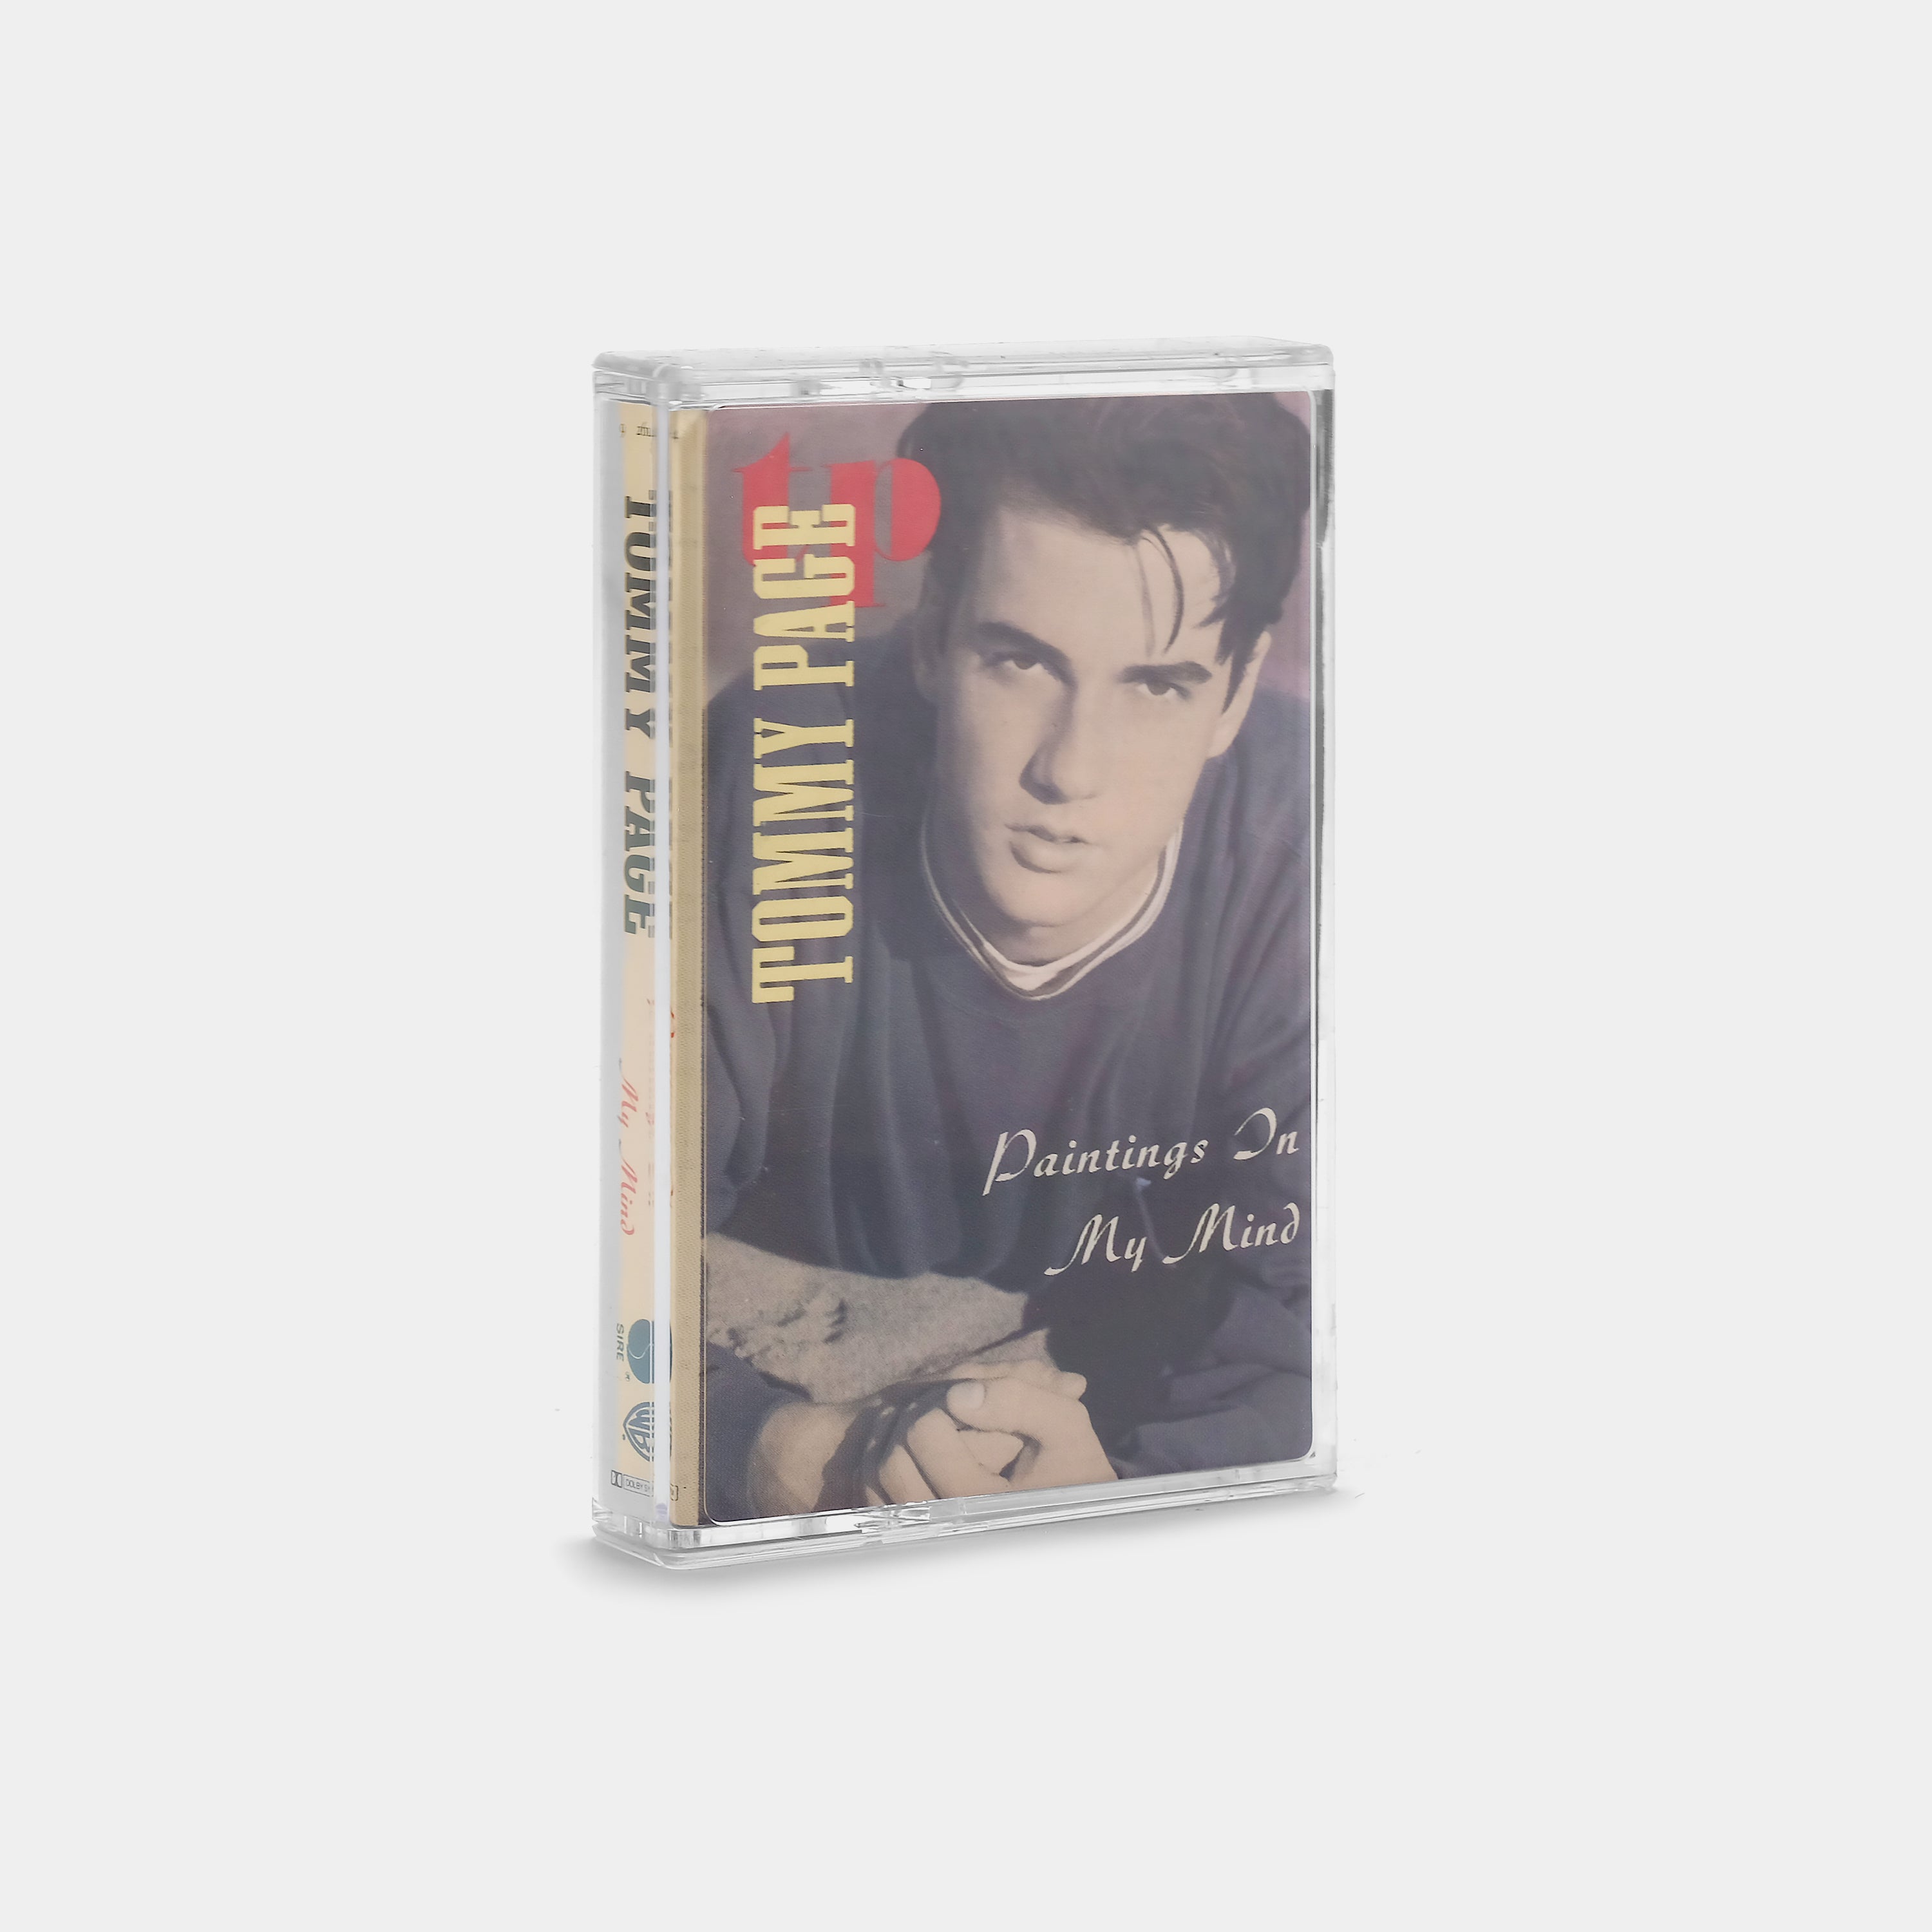 Tommy Page - Paintings on my Mind Cassette Tape